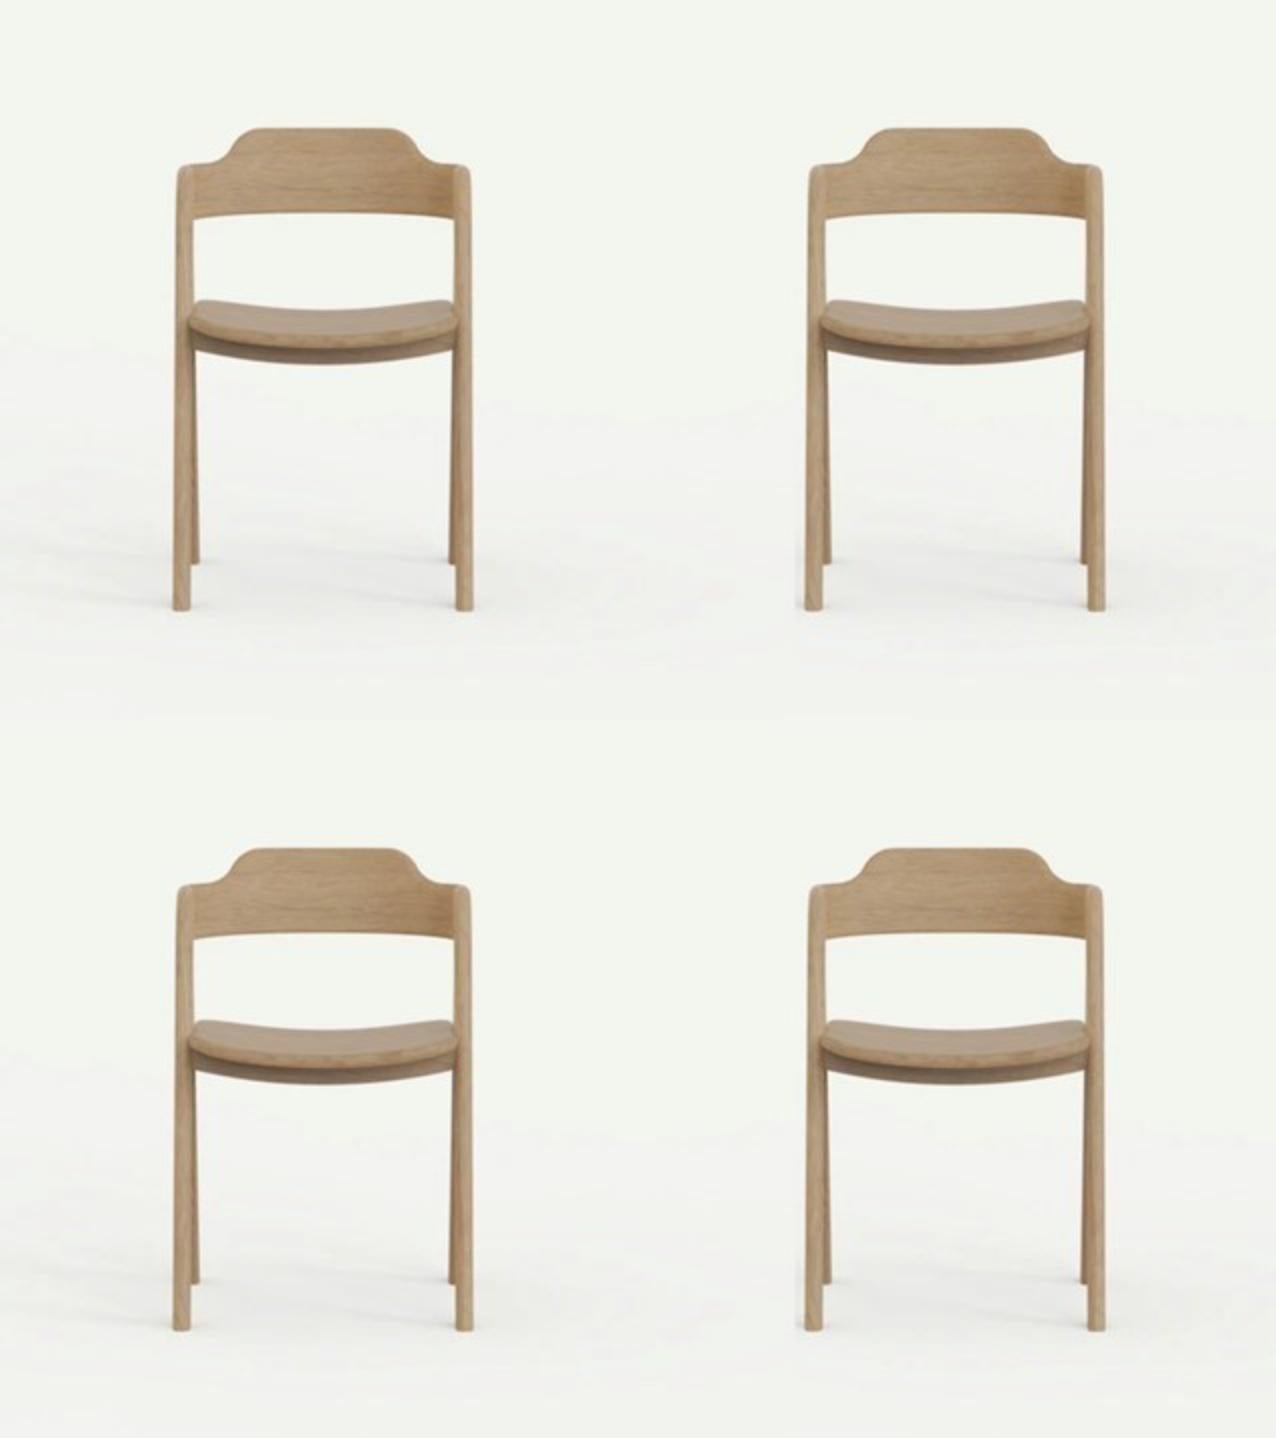 Set of 4 balance chairs by Sebastián Angeles
Material: Walnut
Dimensions: W 40 x D 40 x 100 cm
Also Available: Other colors available.

The love of processes, the properties of materials, details and concepts make Dorica Taller a study not only